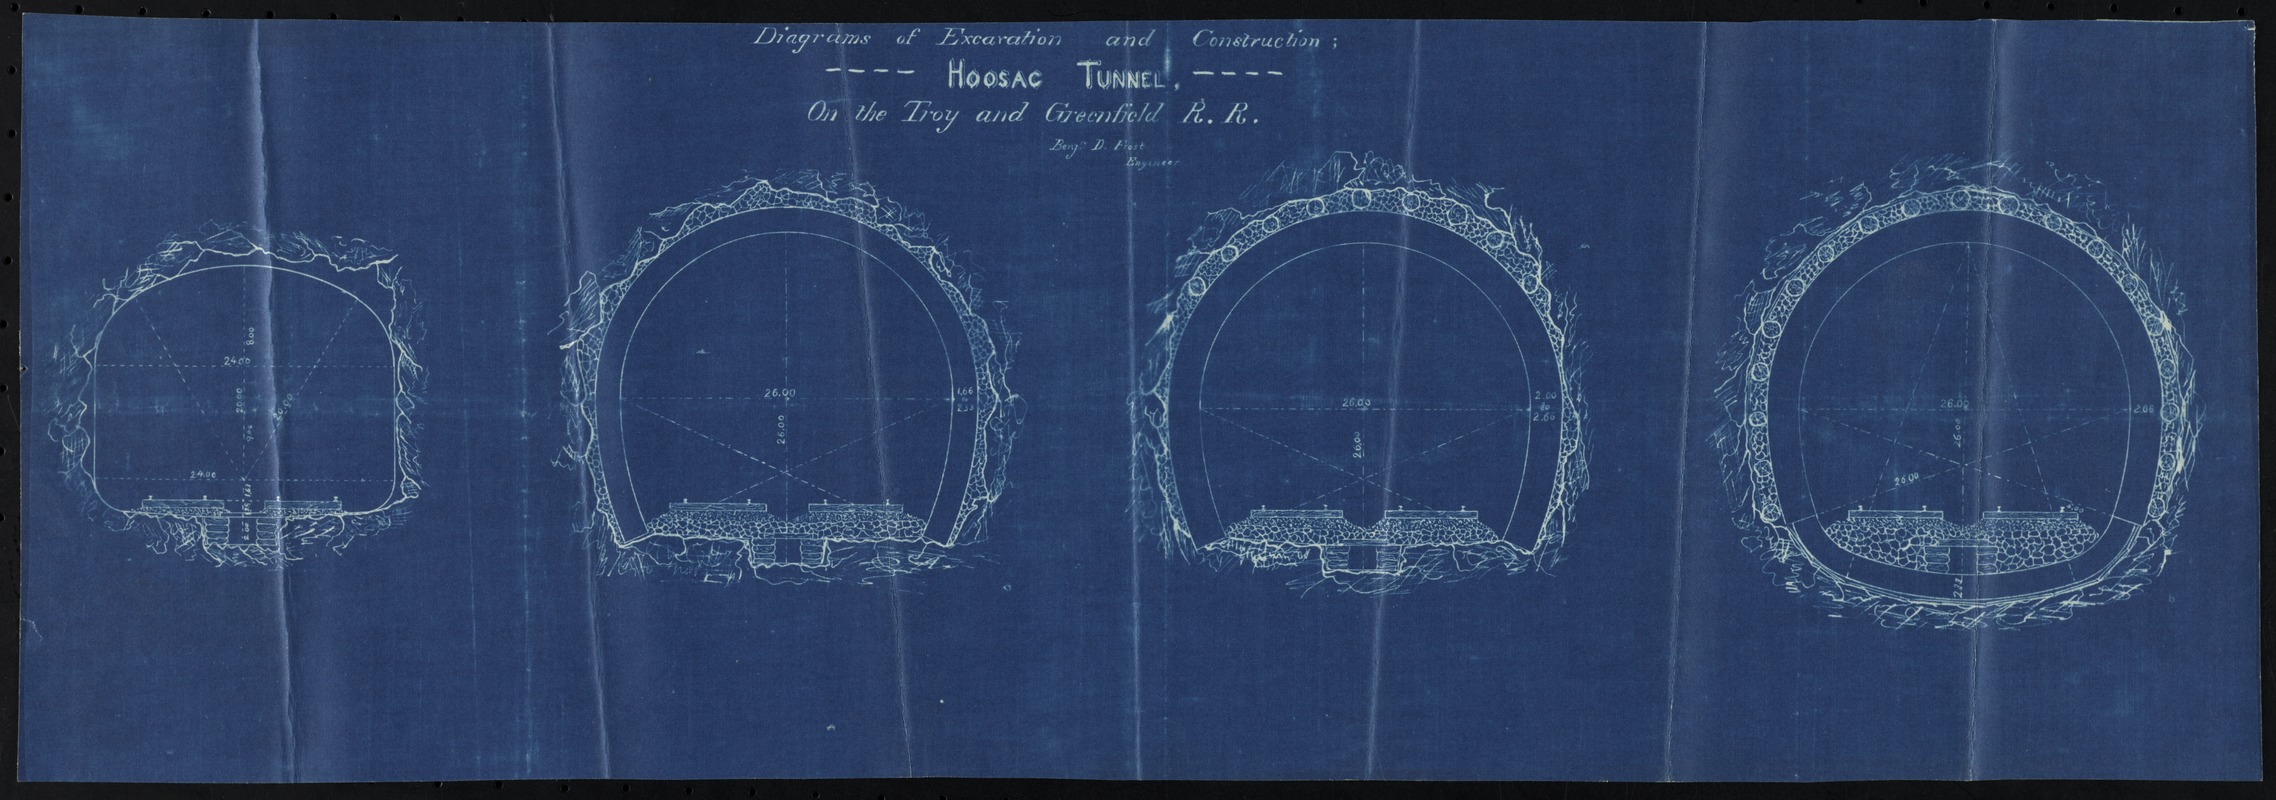 Diagram of excavation and construction. Hoosac Tunnel, on the Troy and Greenfield R.R.